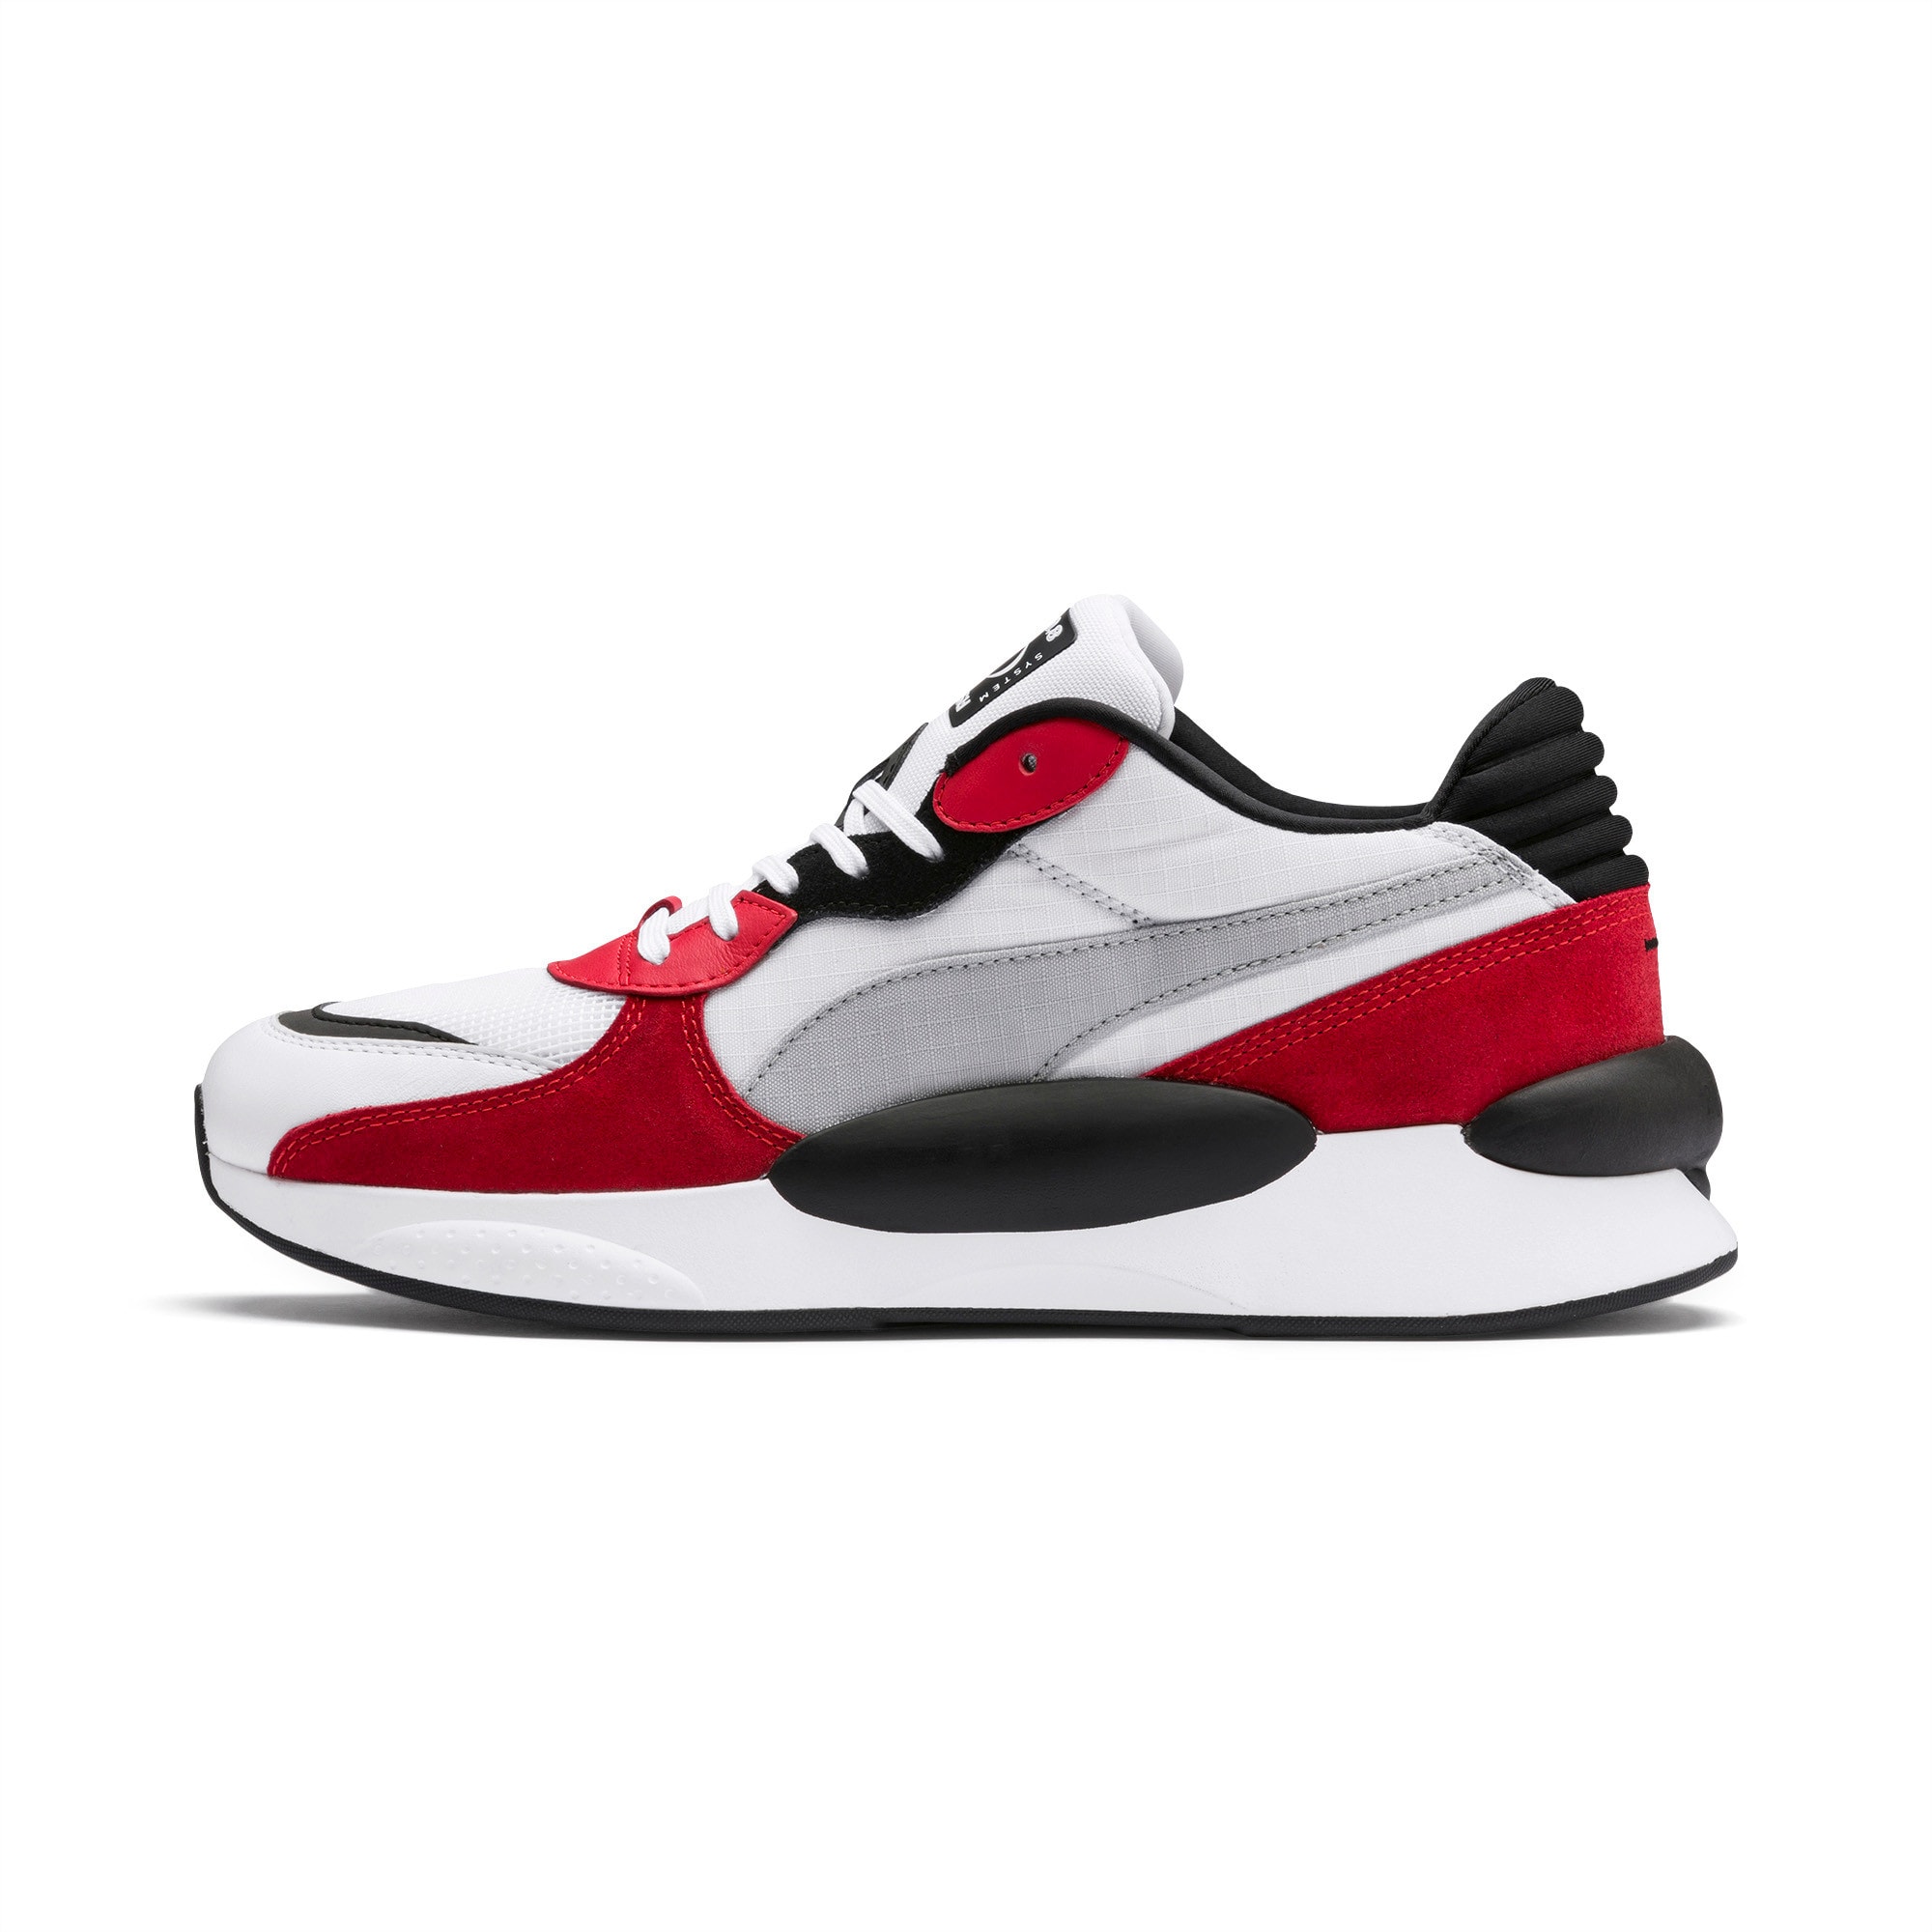 puma running system shoes